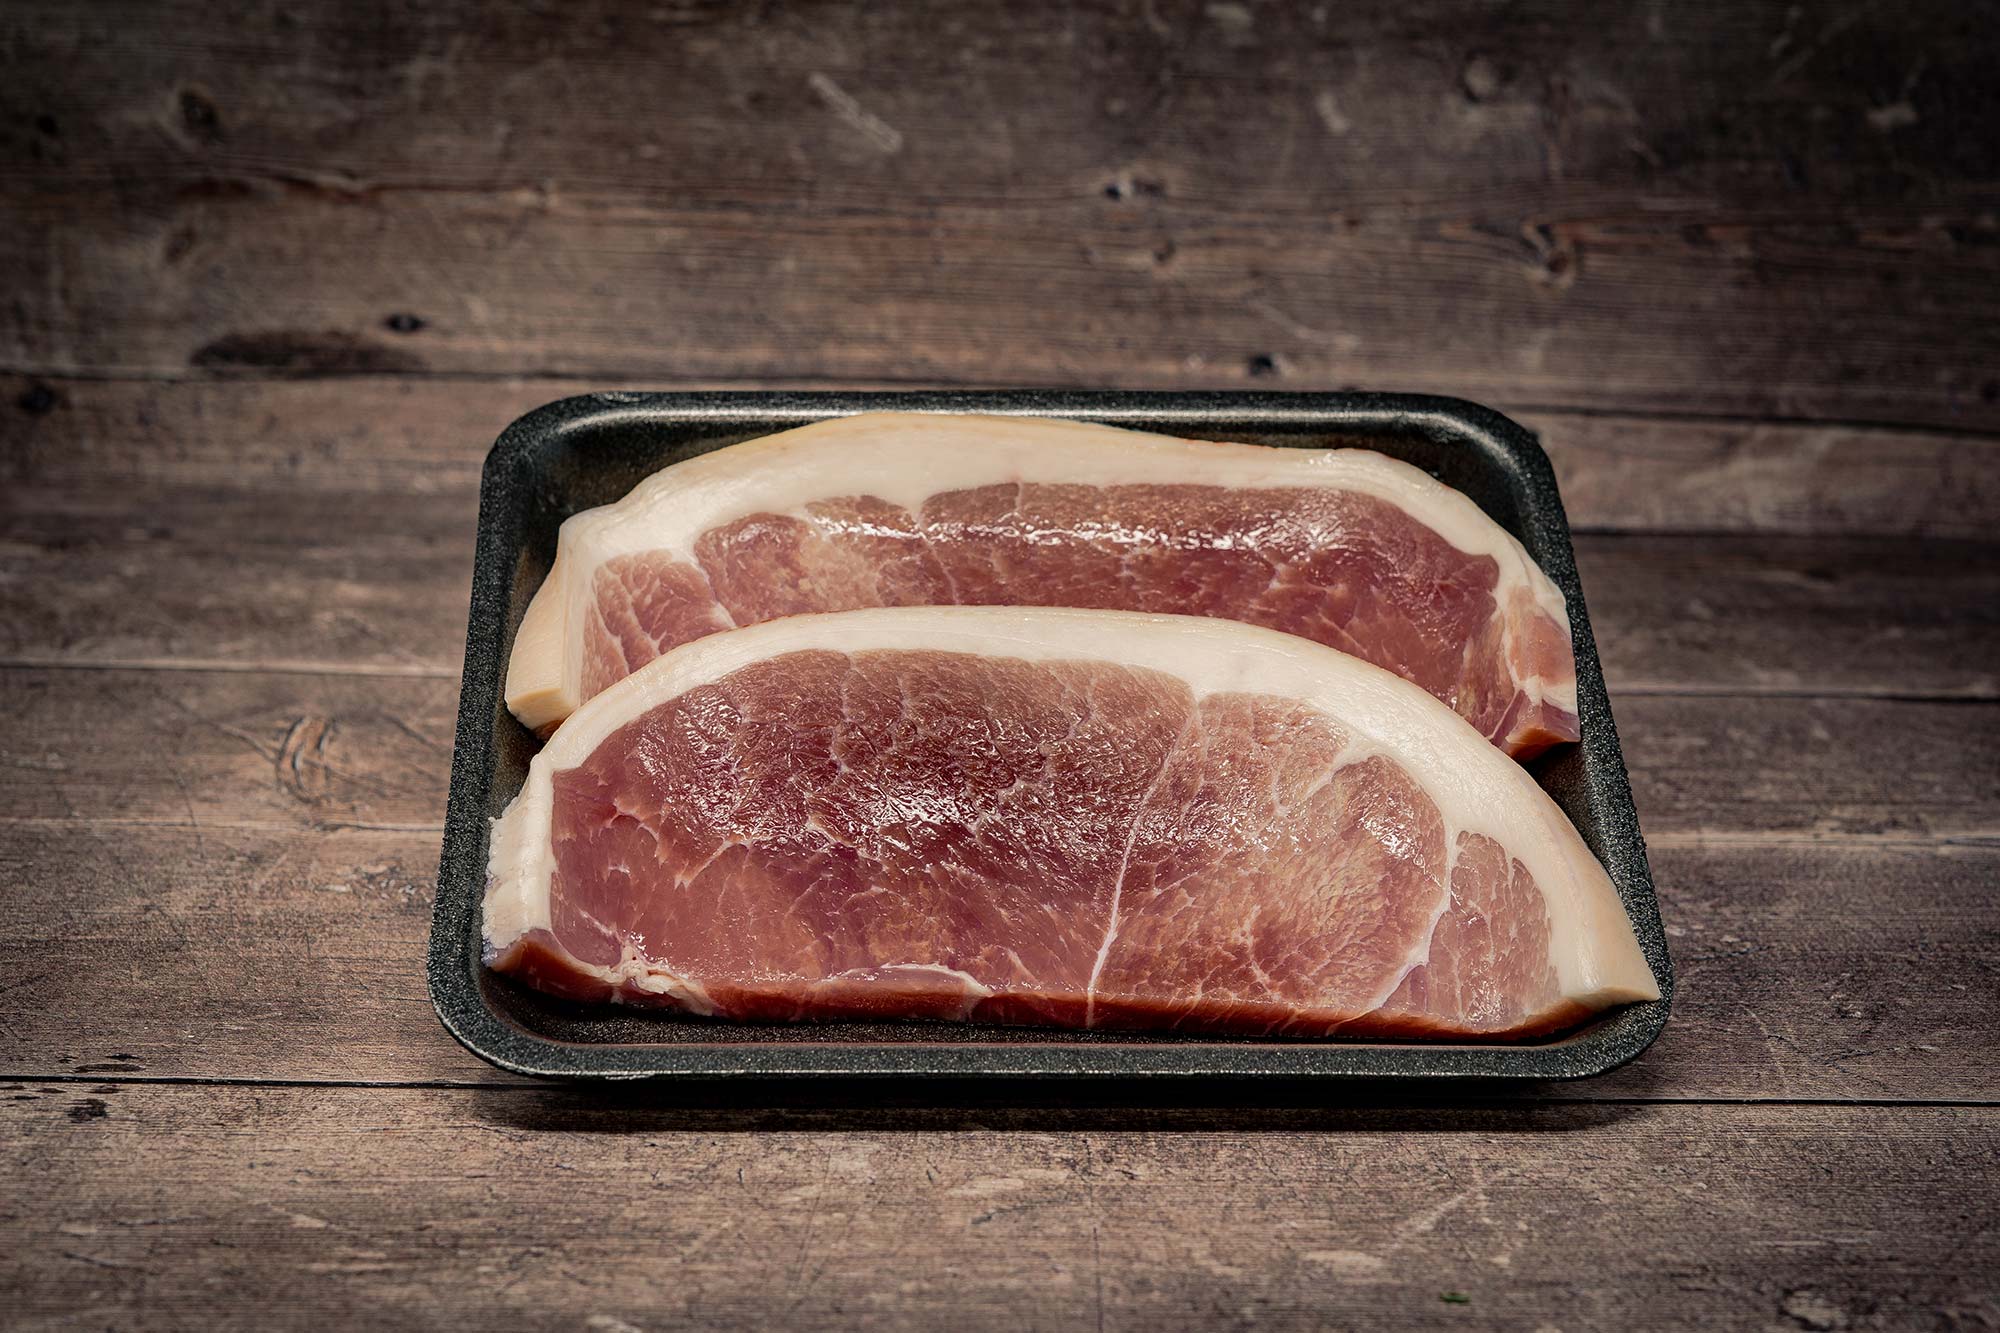 How Long To Oven Bake Gammon Steaks / The steak thickness, how long you